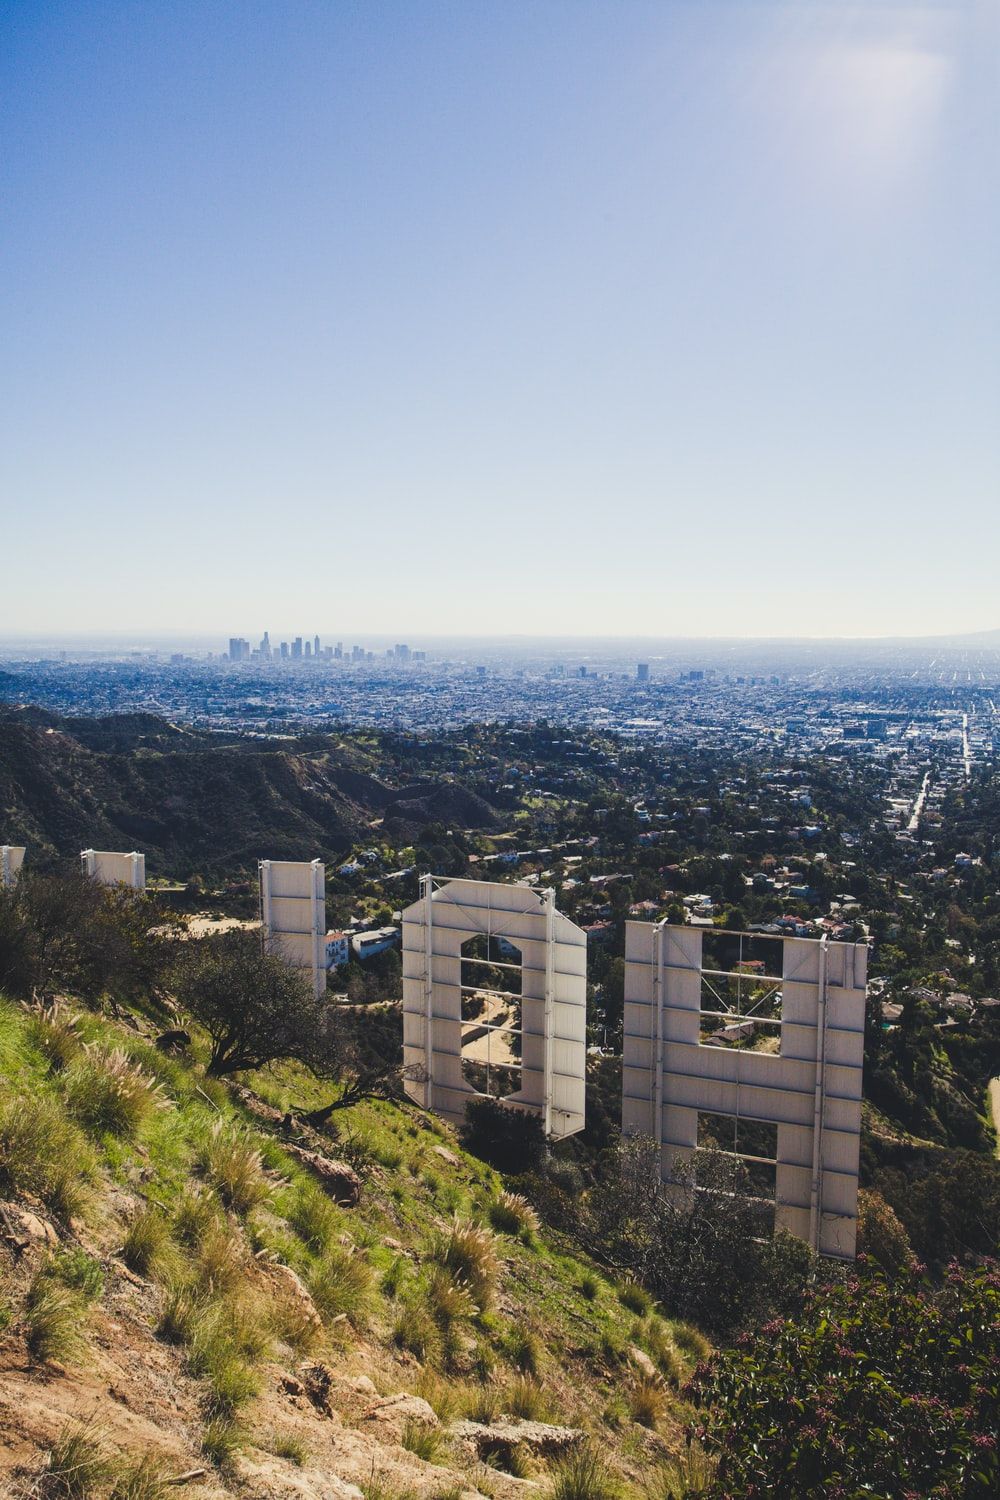 Hollywood Hills, Los Angeles, United States Picture. Download Free Image